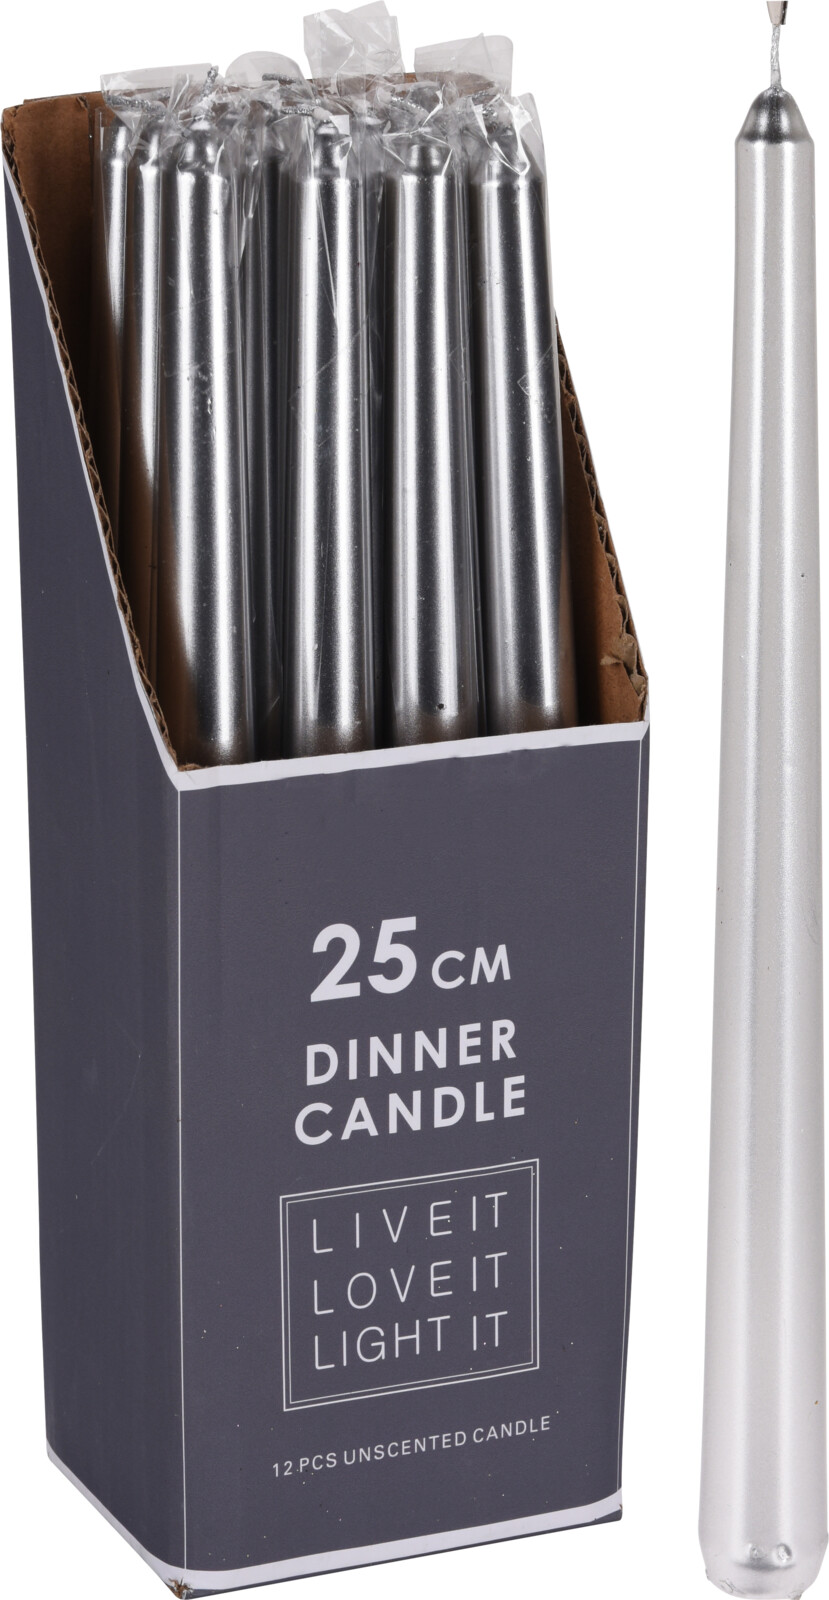 DINNER CANDLE SILVER 25CM